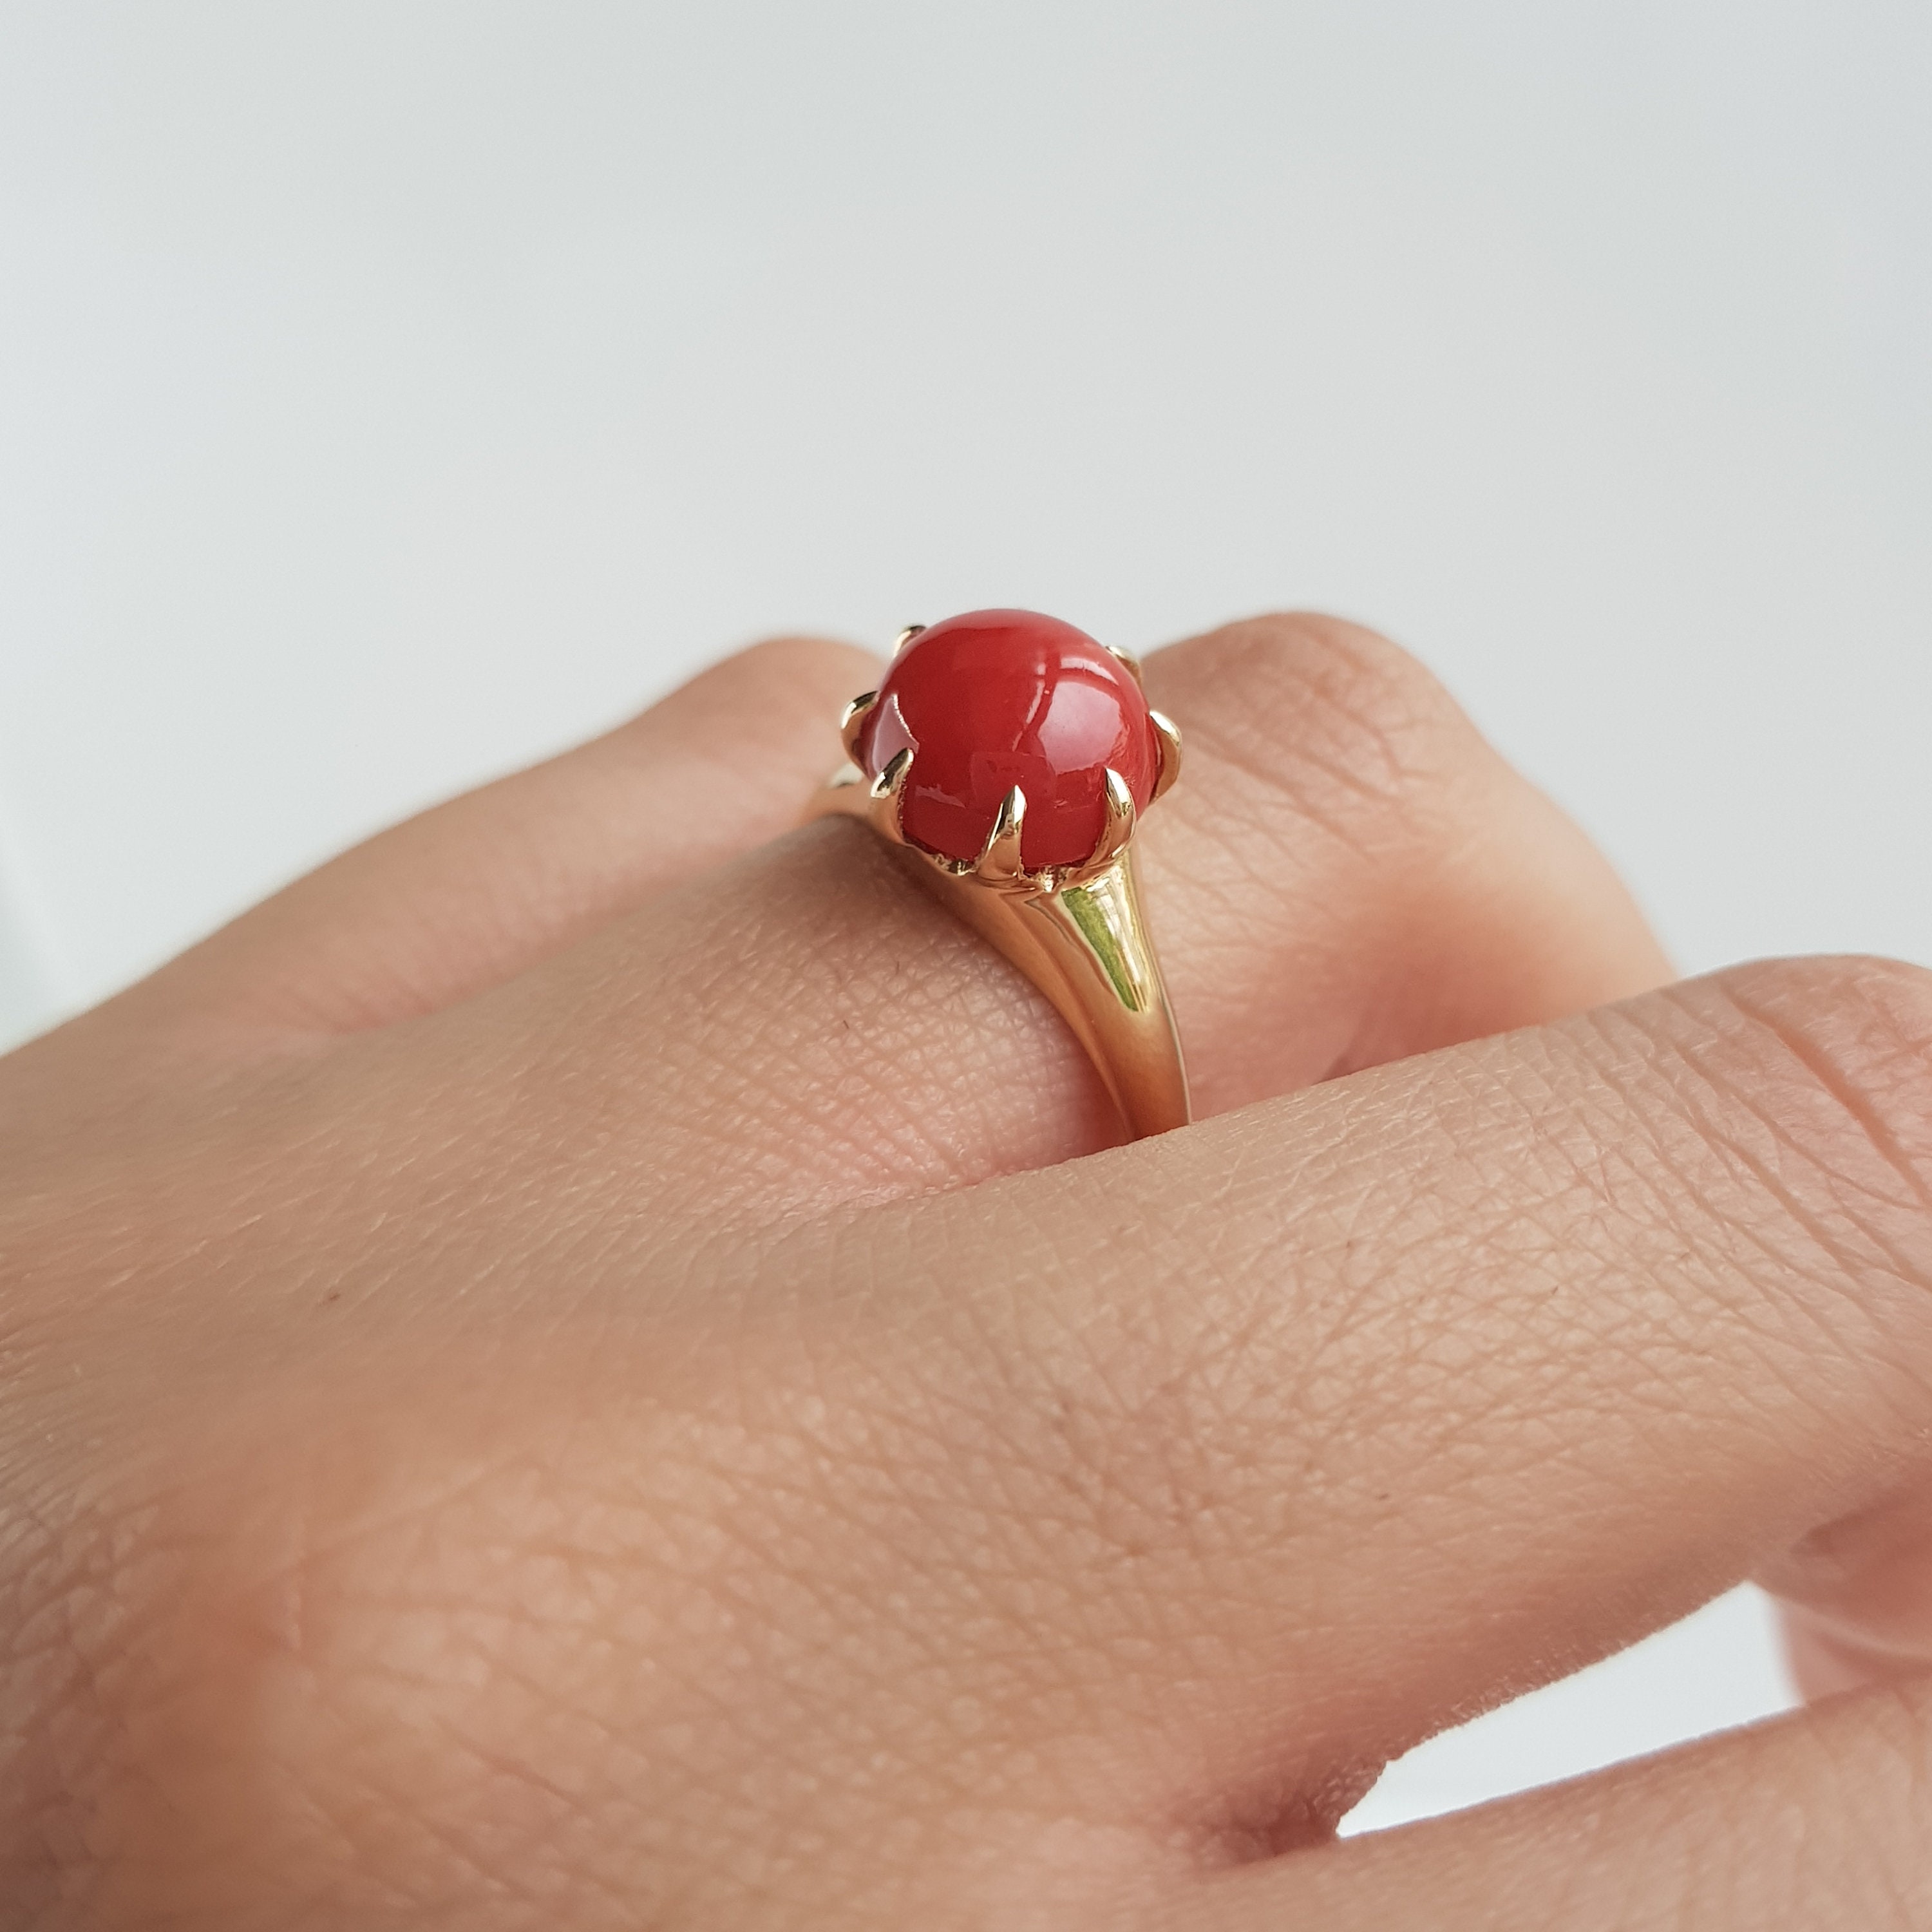 Buy Santa Fe Style Plum Coral Ring in Sterling Silver (Size 6.0) 10.50 ctw  at ShopLC.